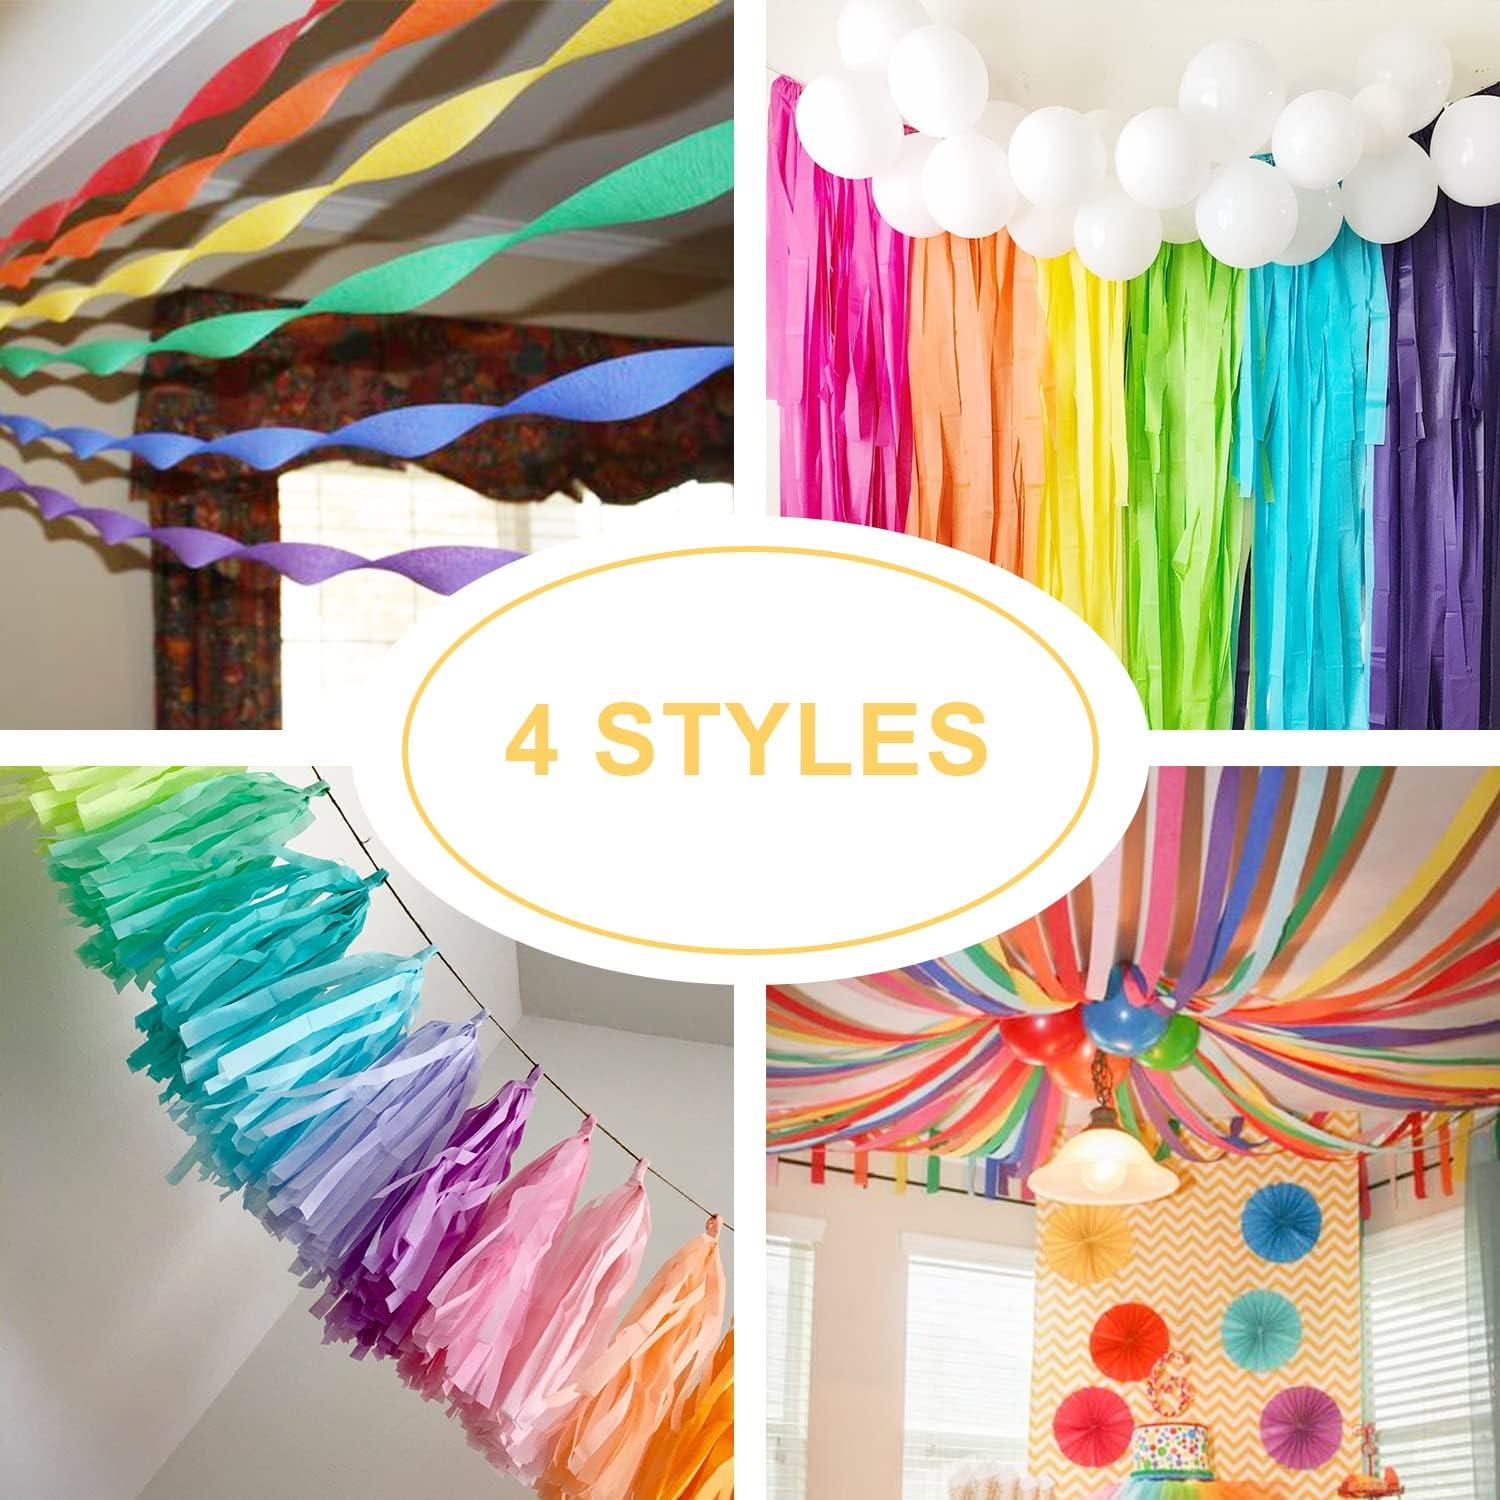 Beliueyes 8 Rolls Rose Gold Crepe Paper Streamers Party